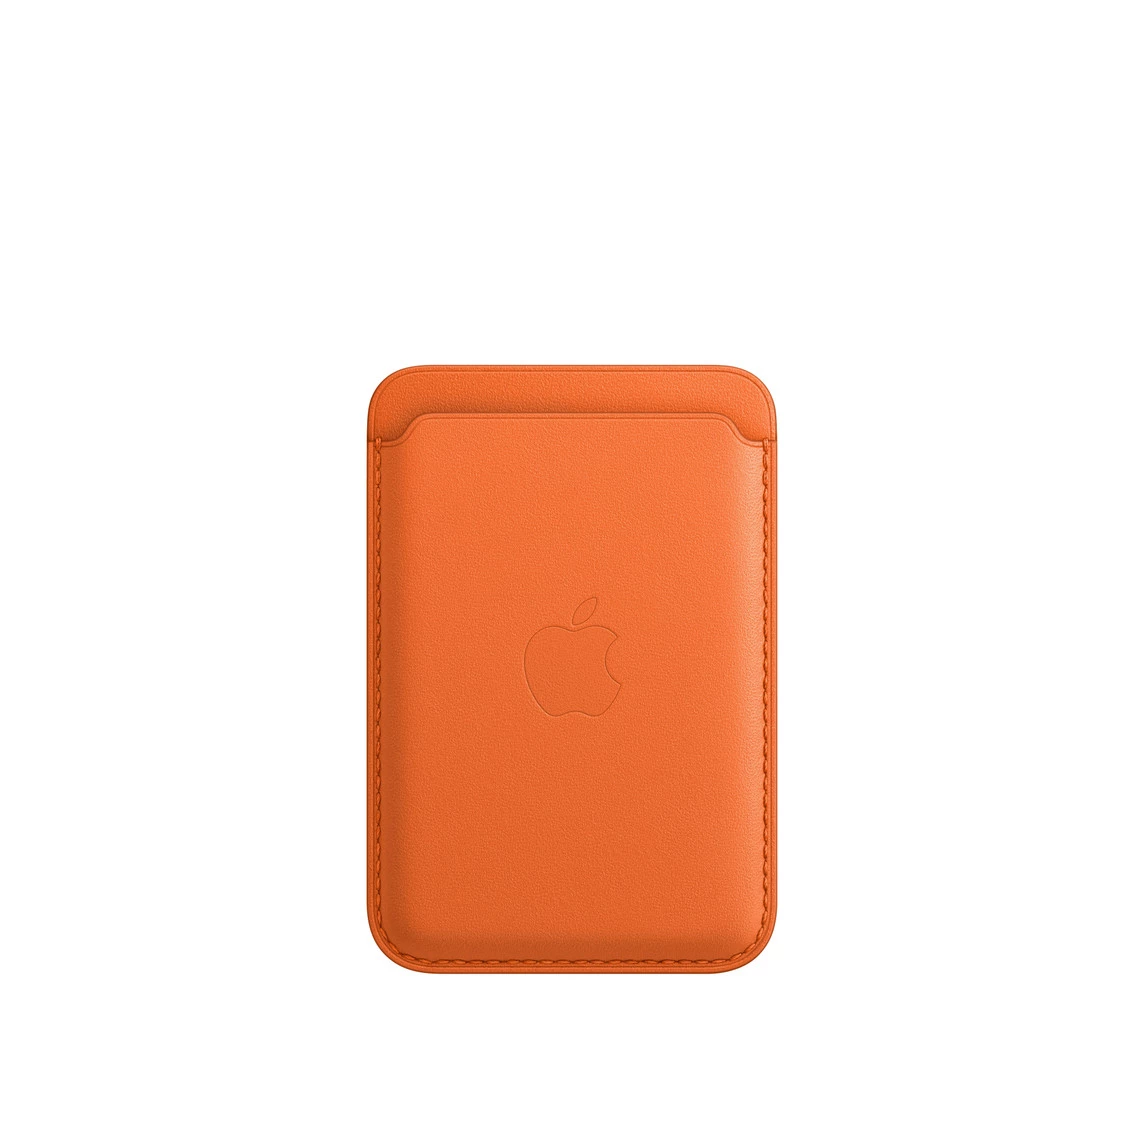 Apple iPhone Leather Wallet with MagSafe - Orange (MPPY3)